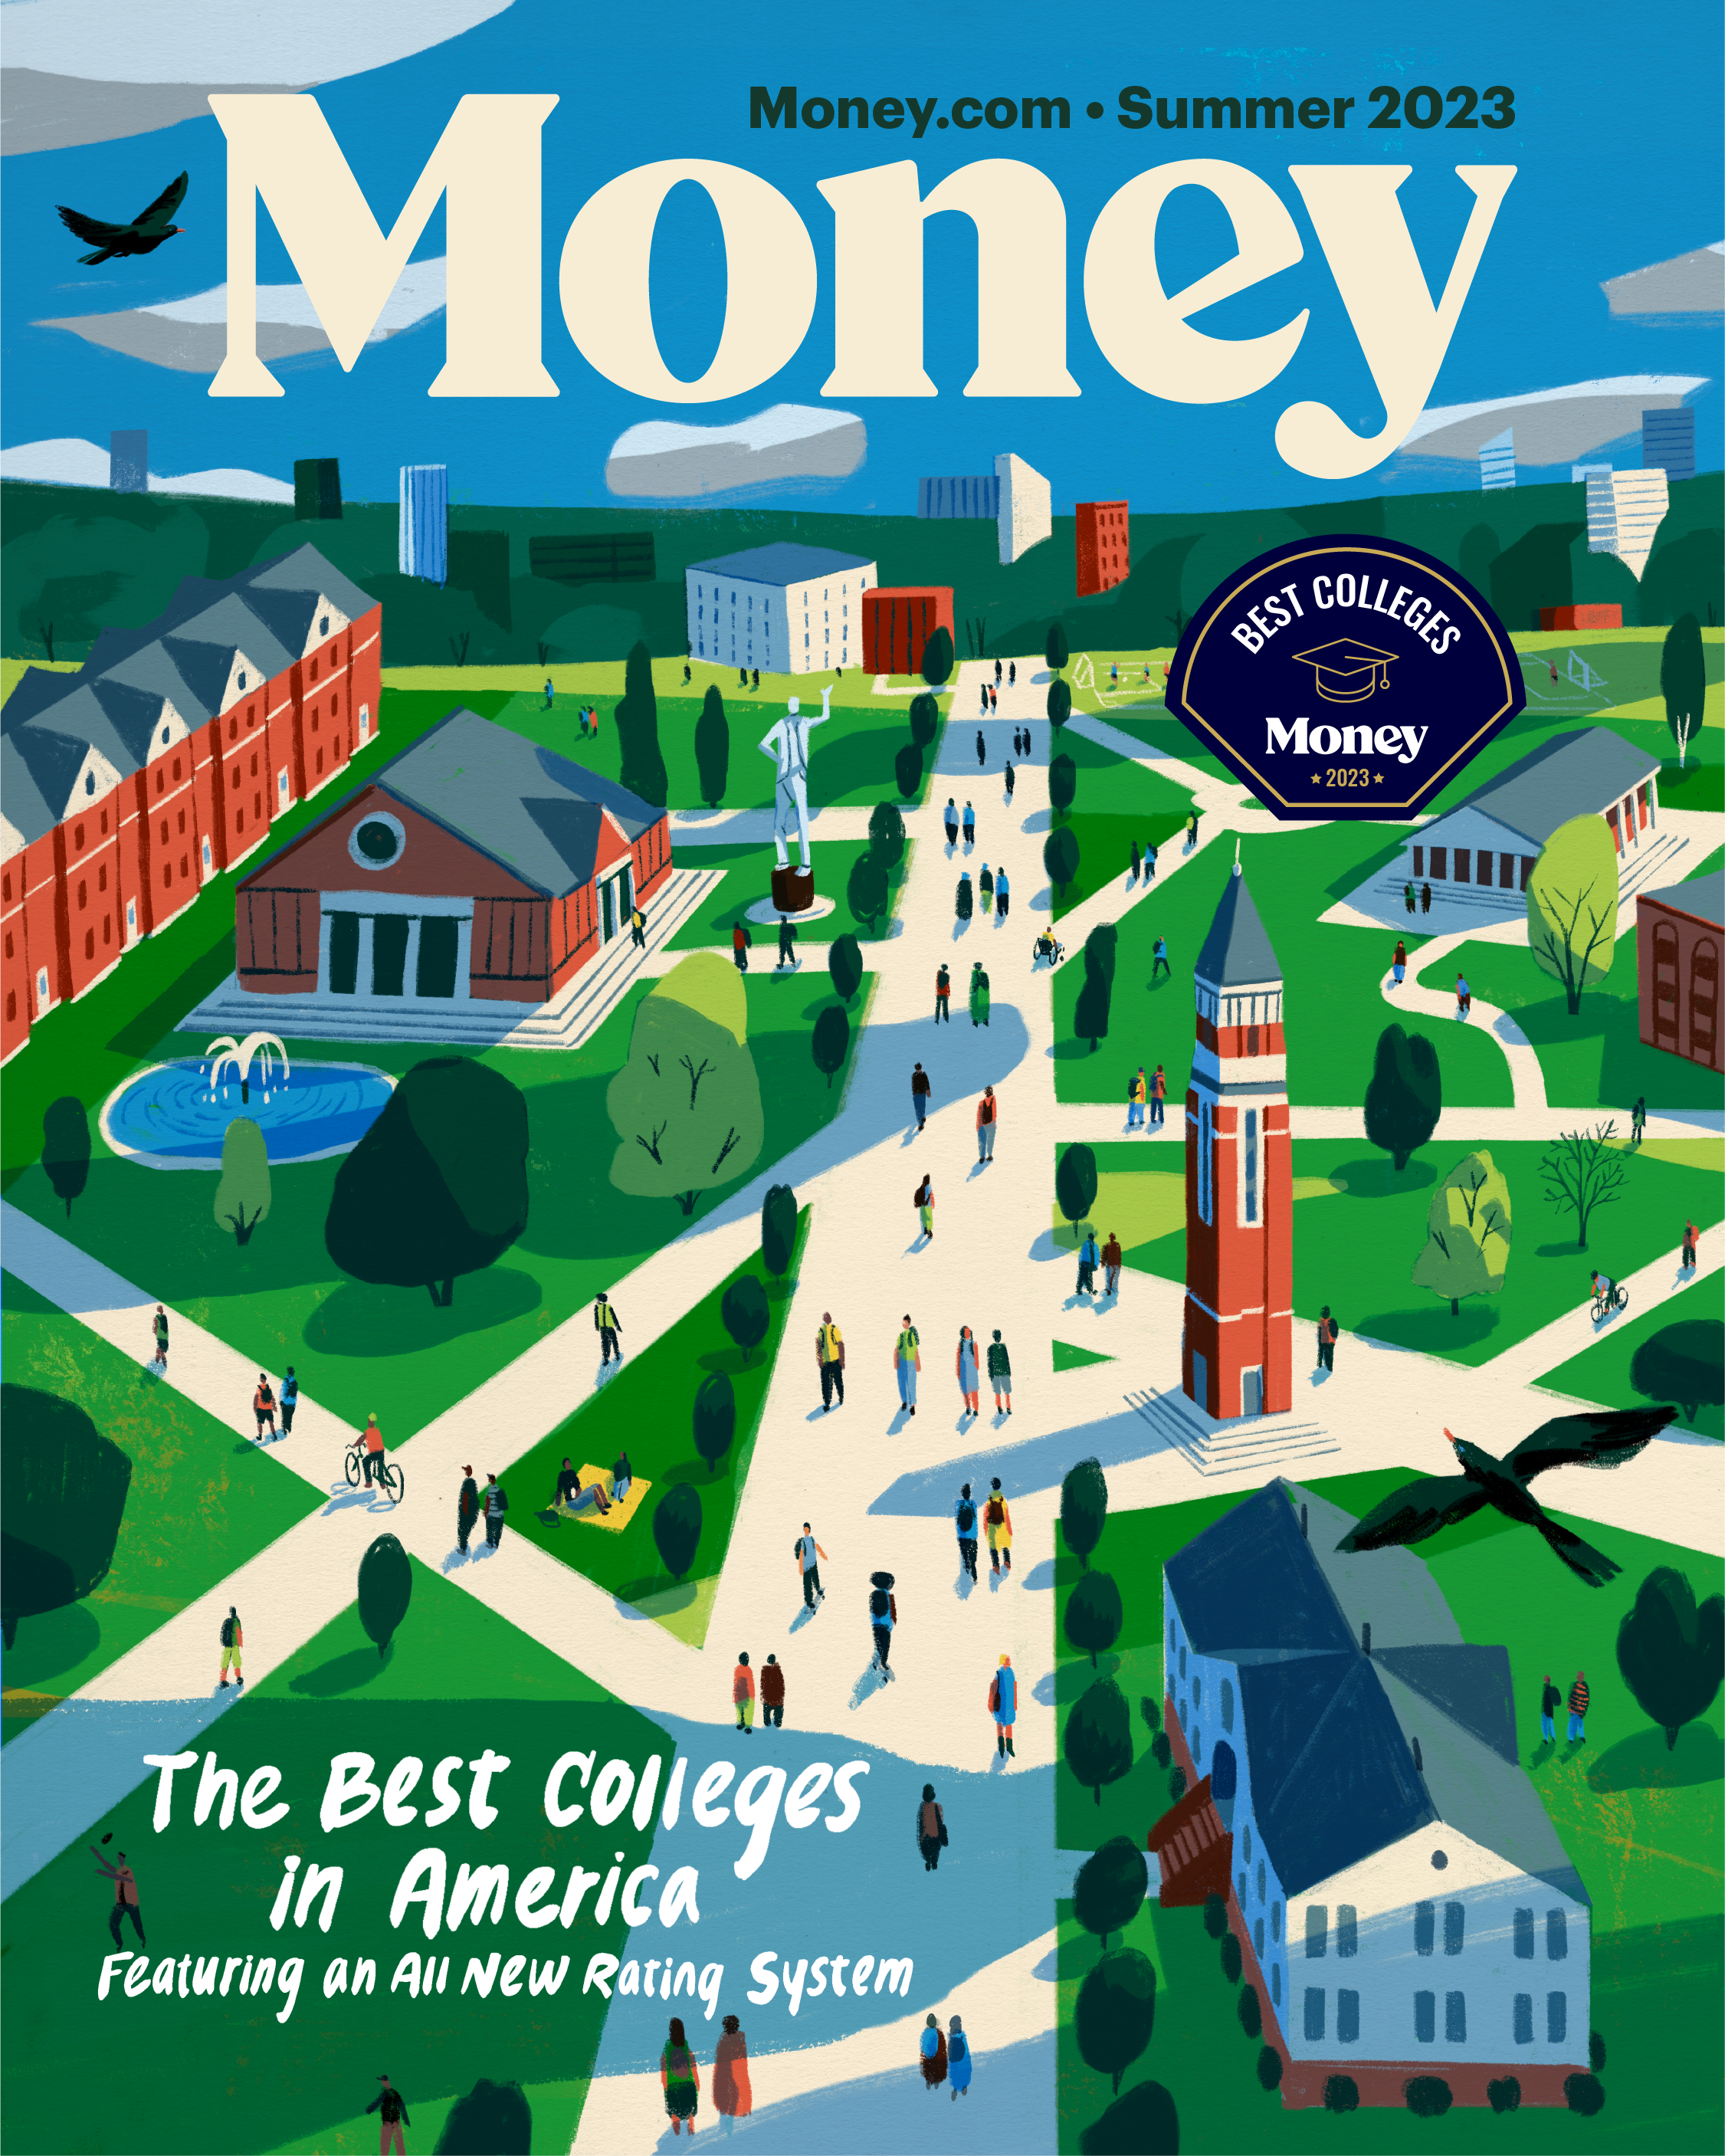 There Is No Single 'Best College' in Money's New Rating System